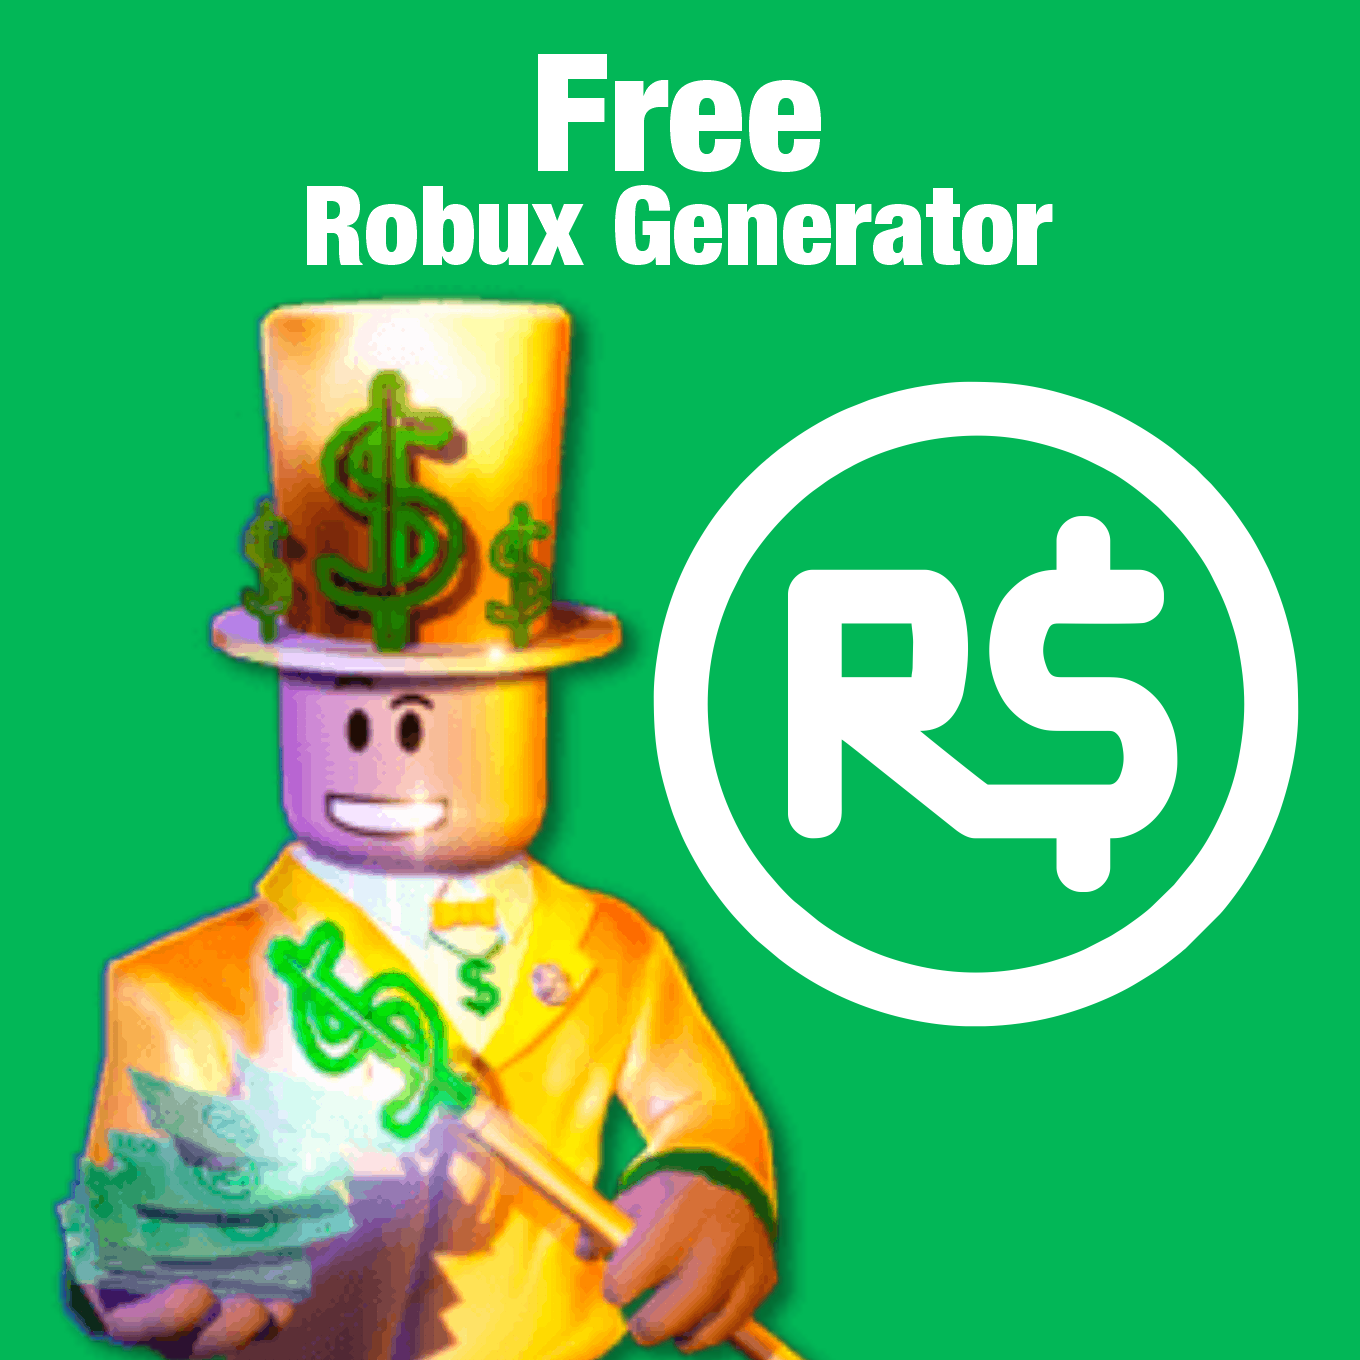 How To Get Free Robux - 30000 robux gratis